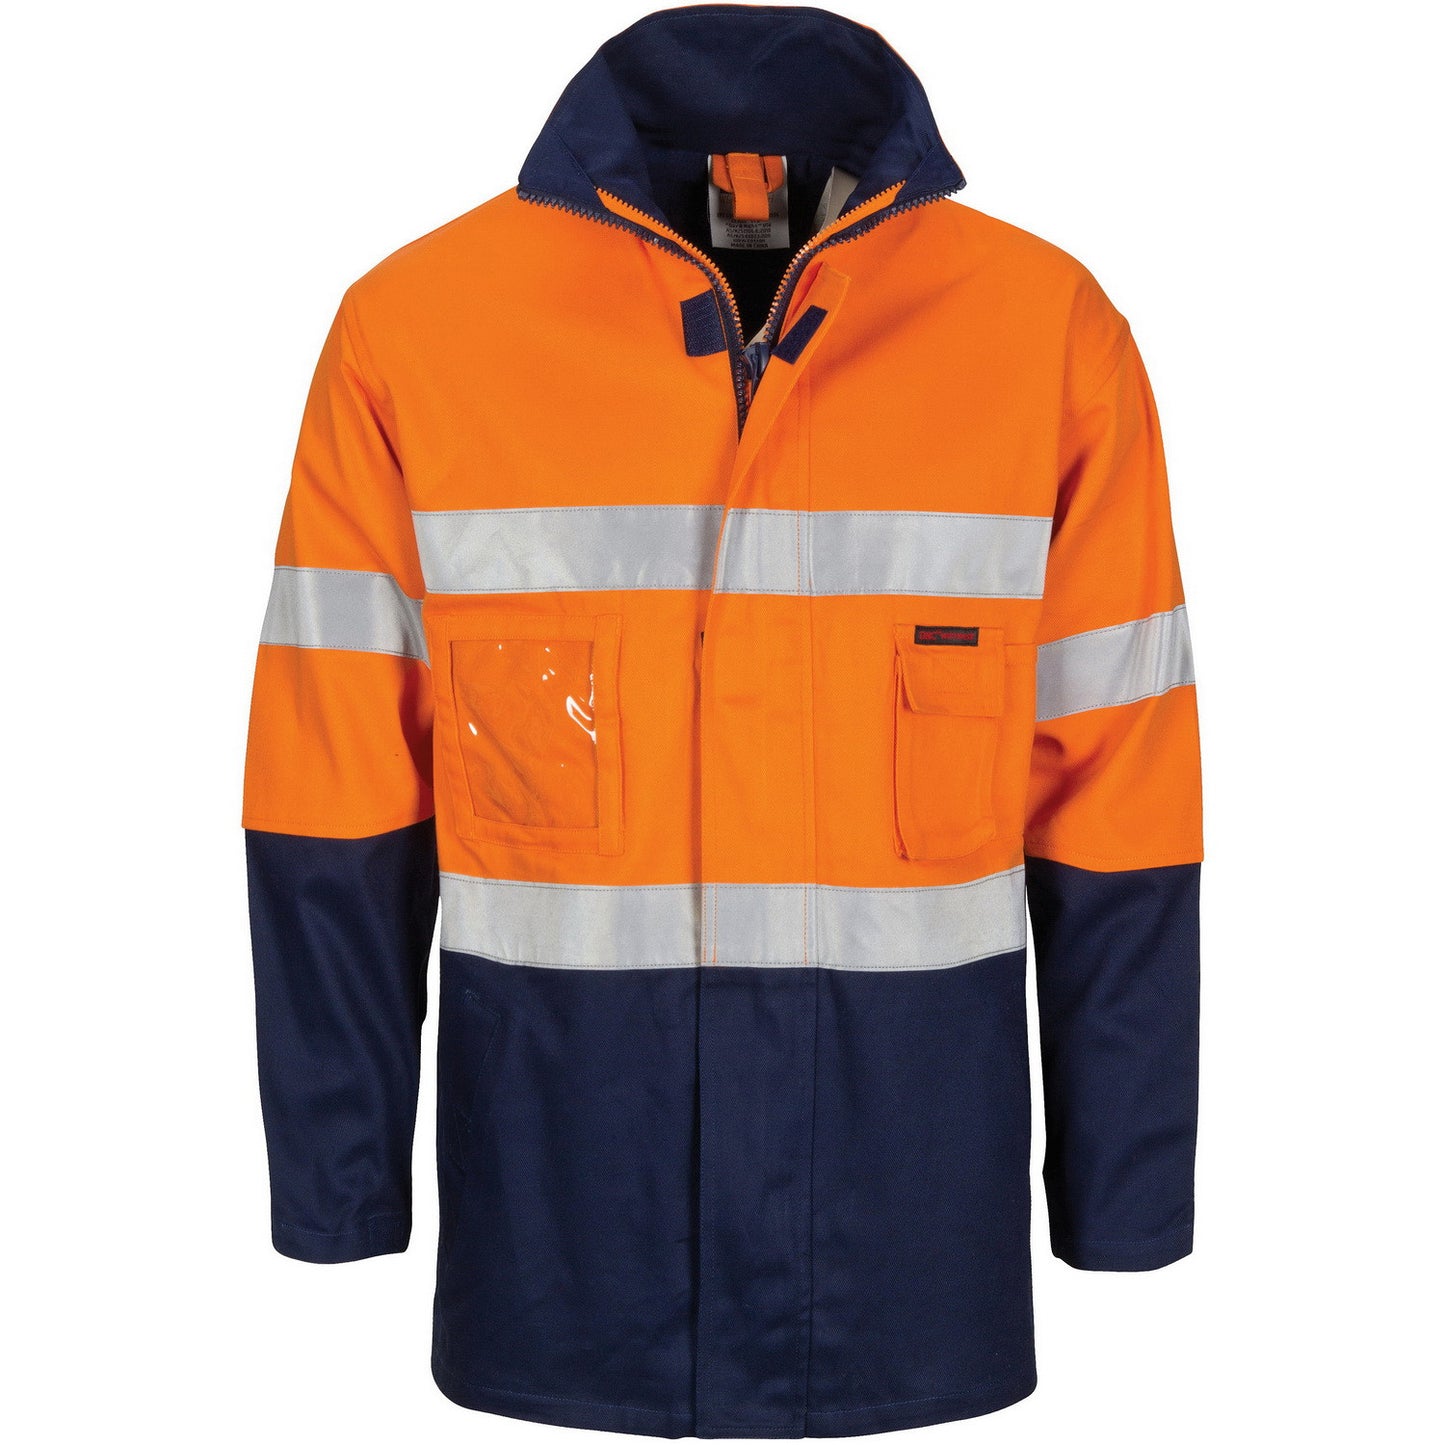 DNC Hi-Vis Cotton Drill "2 in 1" Jacket with Generic Reflective R/Tape (3767)